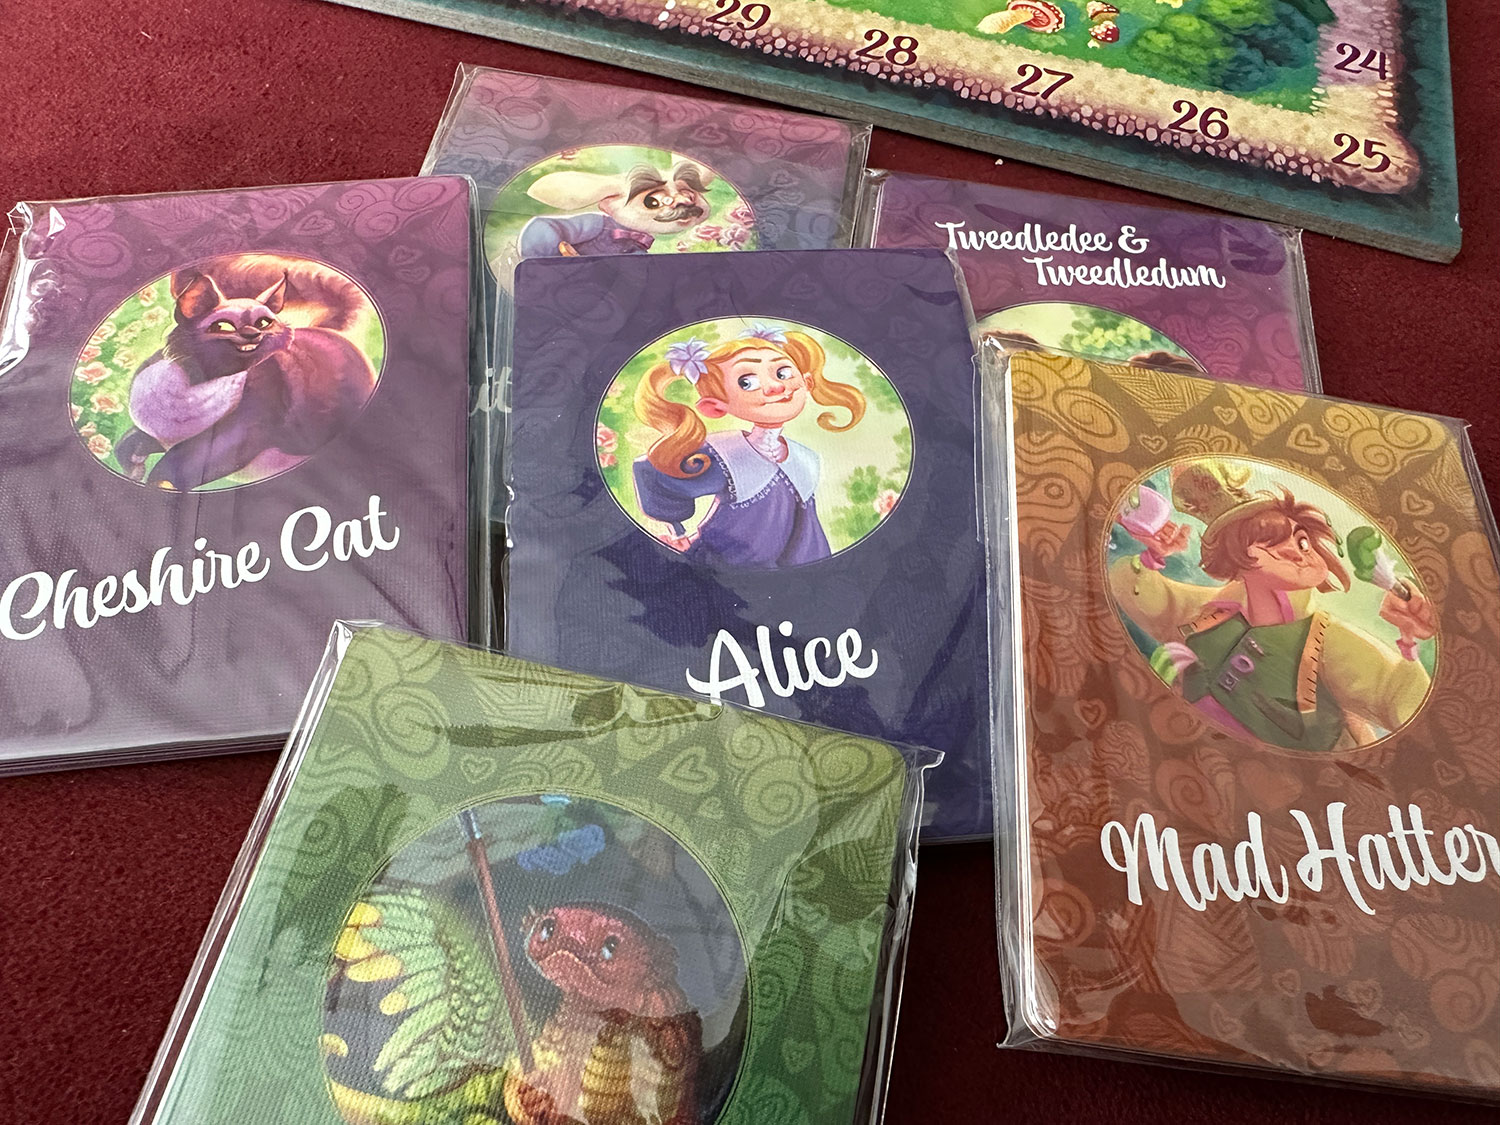 Paint the Roses a cooperative Alice in Wonderland Board Game